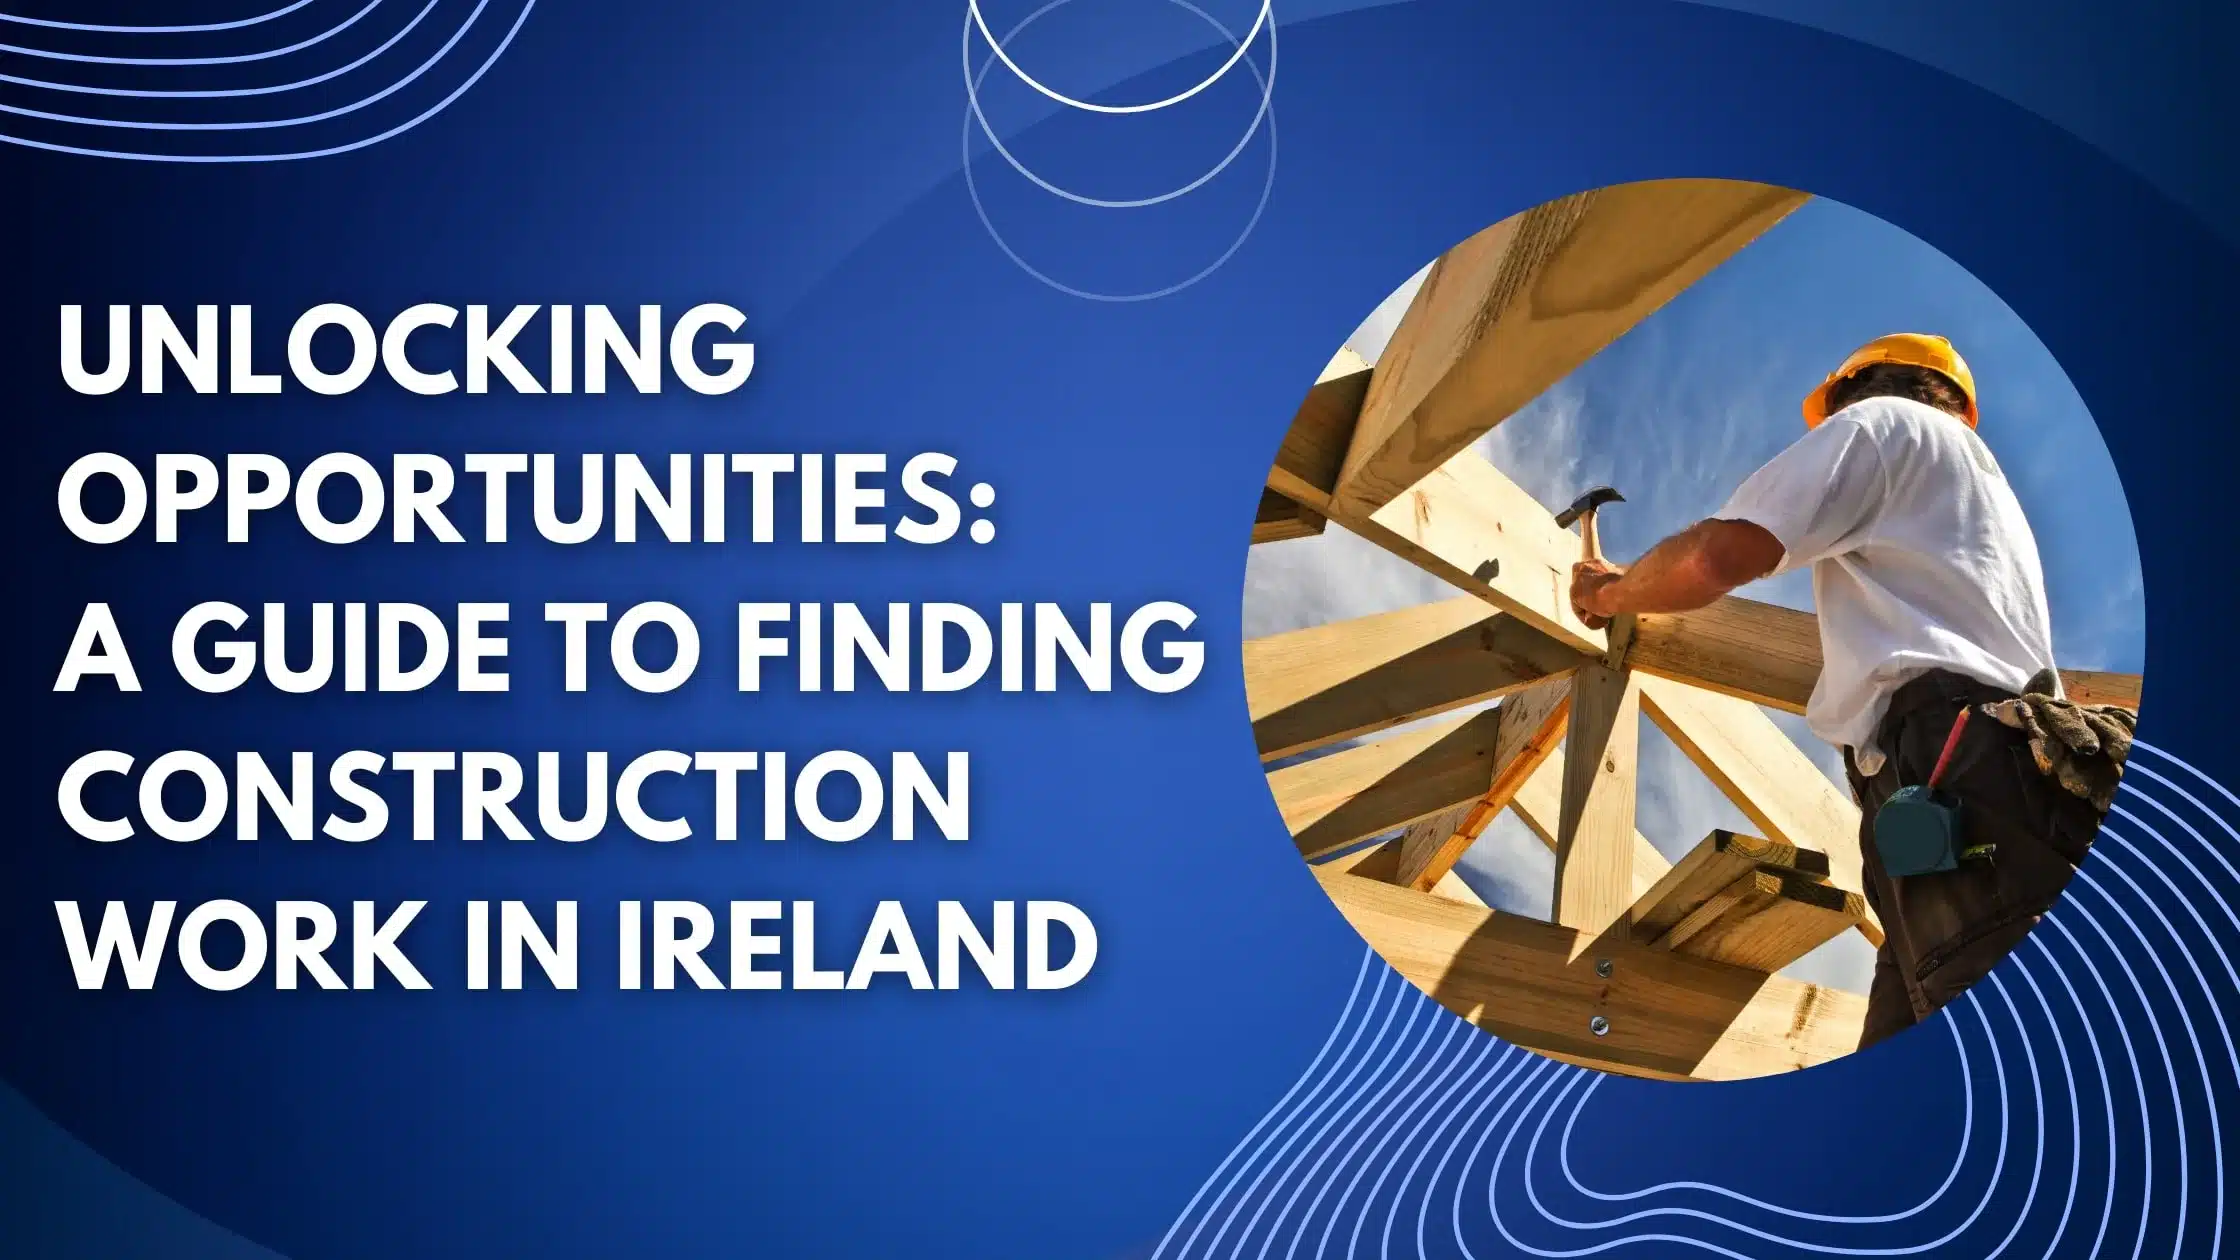 Unlocking Opportunities: A Guide to Finding Construction Work in Ireland